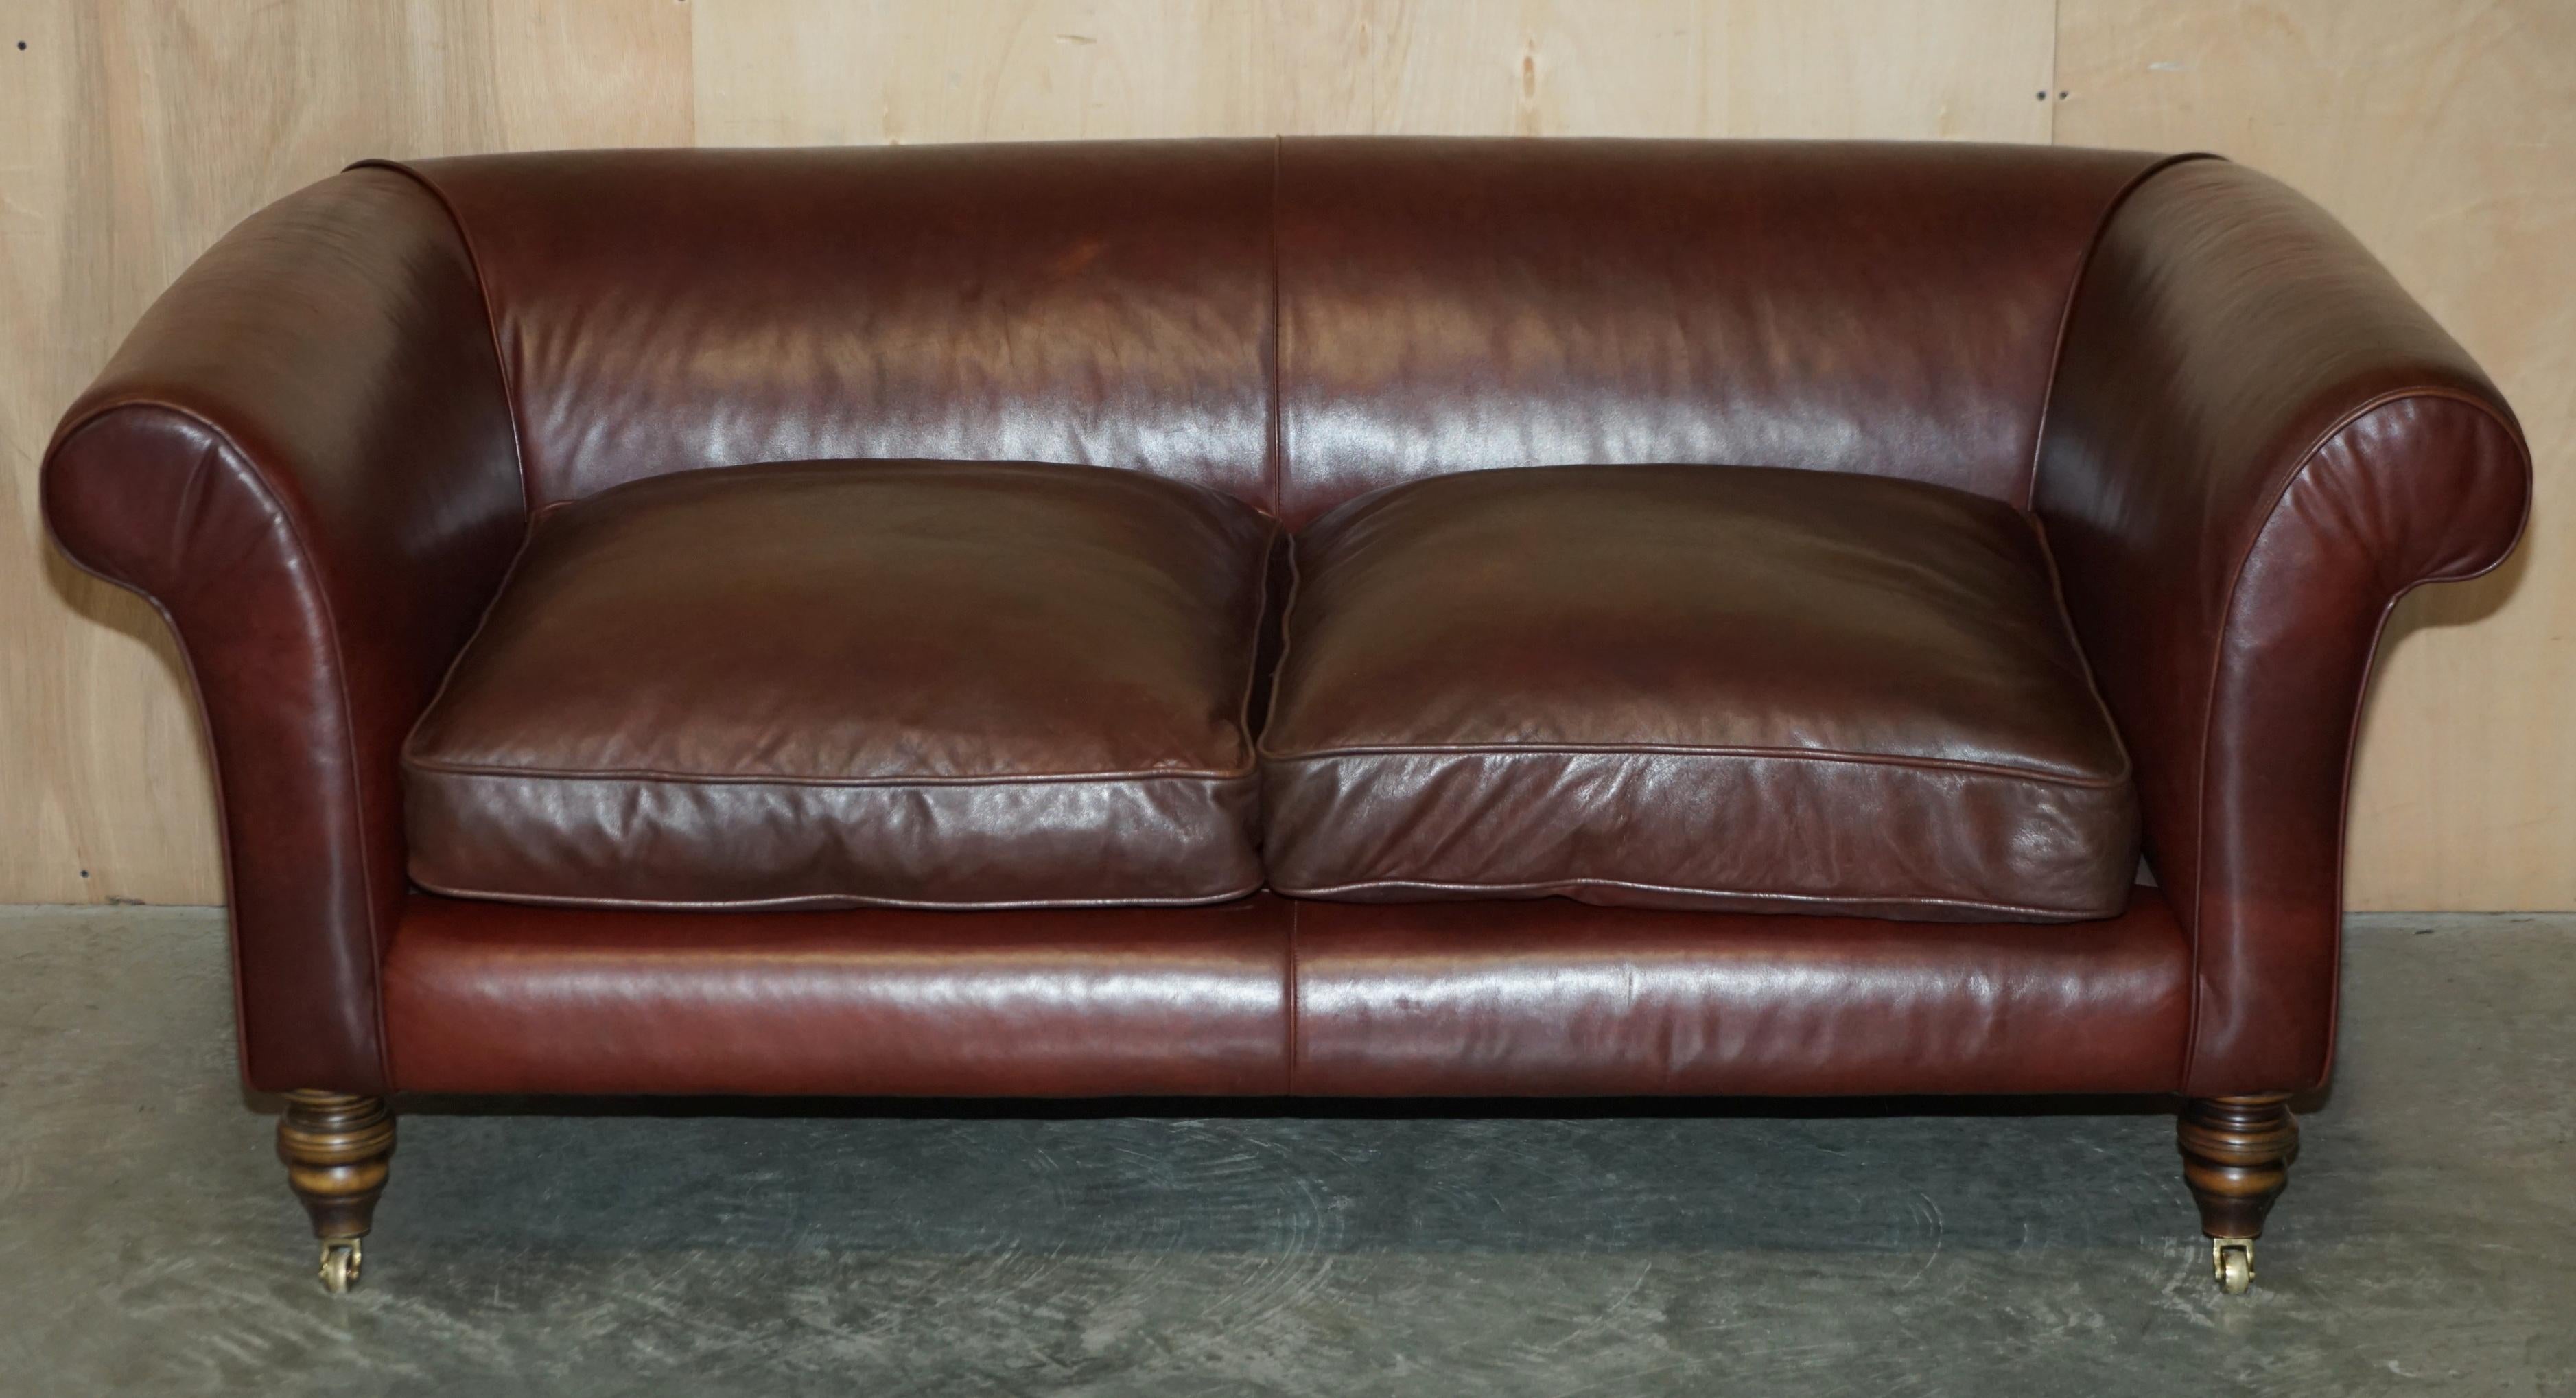 ViNTAGE HAND DYED BROWN LEATHER ART DECO THREE SEAT SOFA FEATHER FILLED  SEAT For Sale at 1stDibs